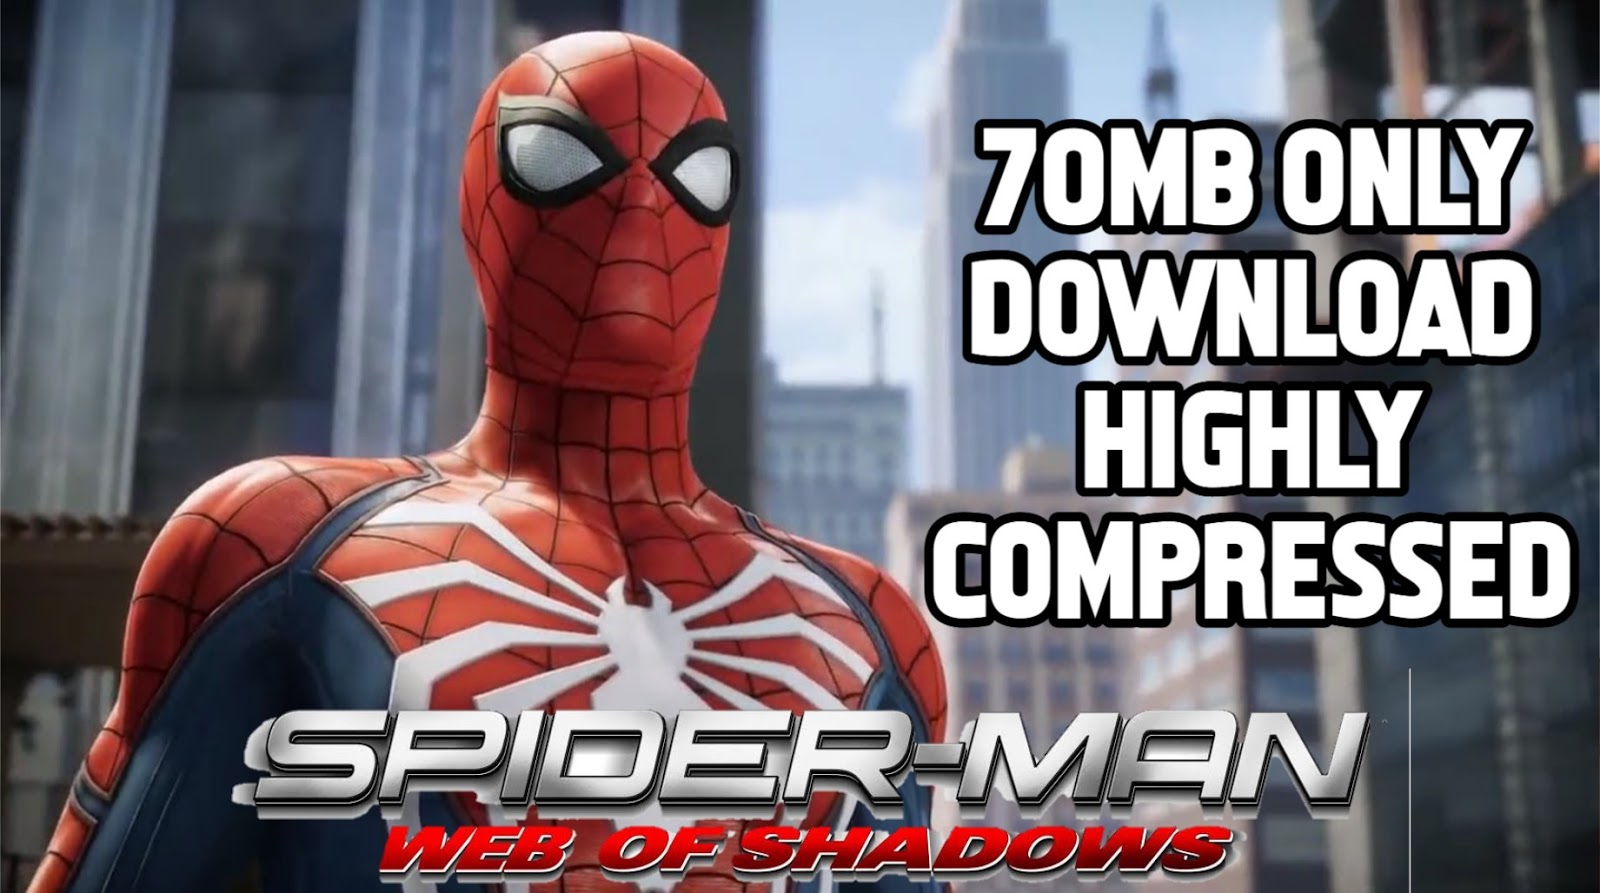 Spider-Man Web of Shadows PSP iso highly compressed, by Techney